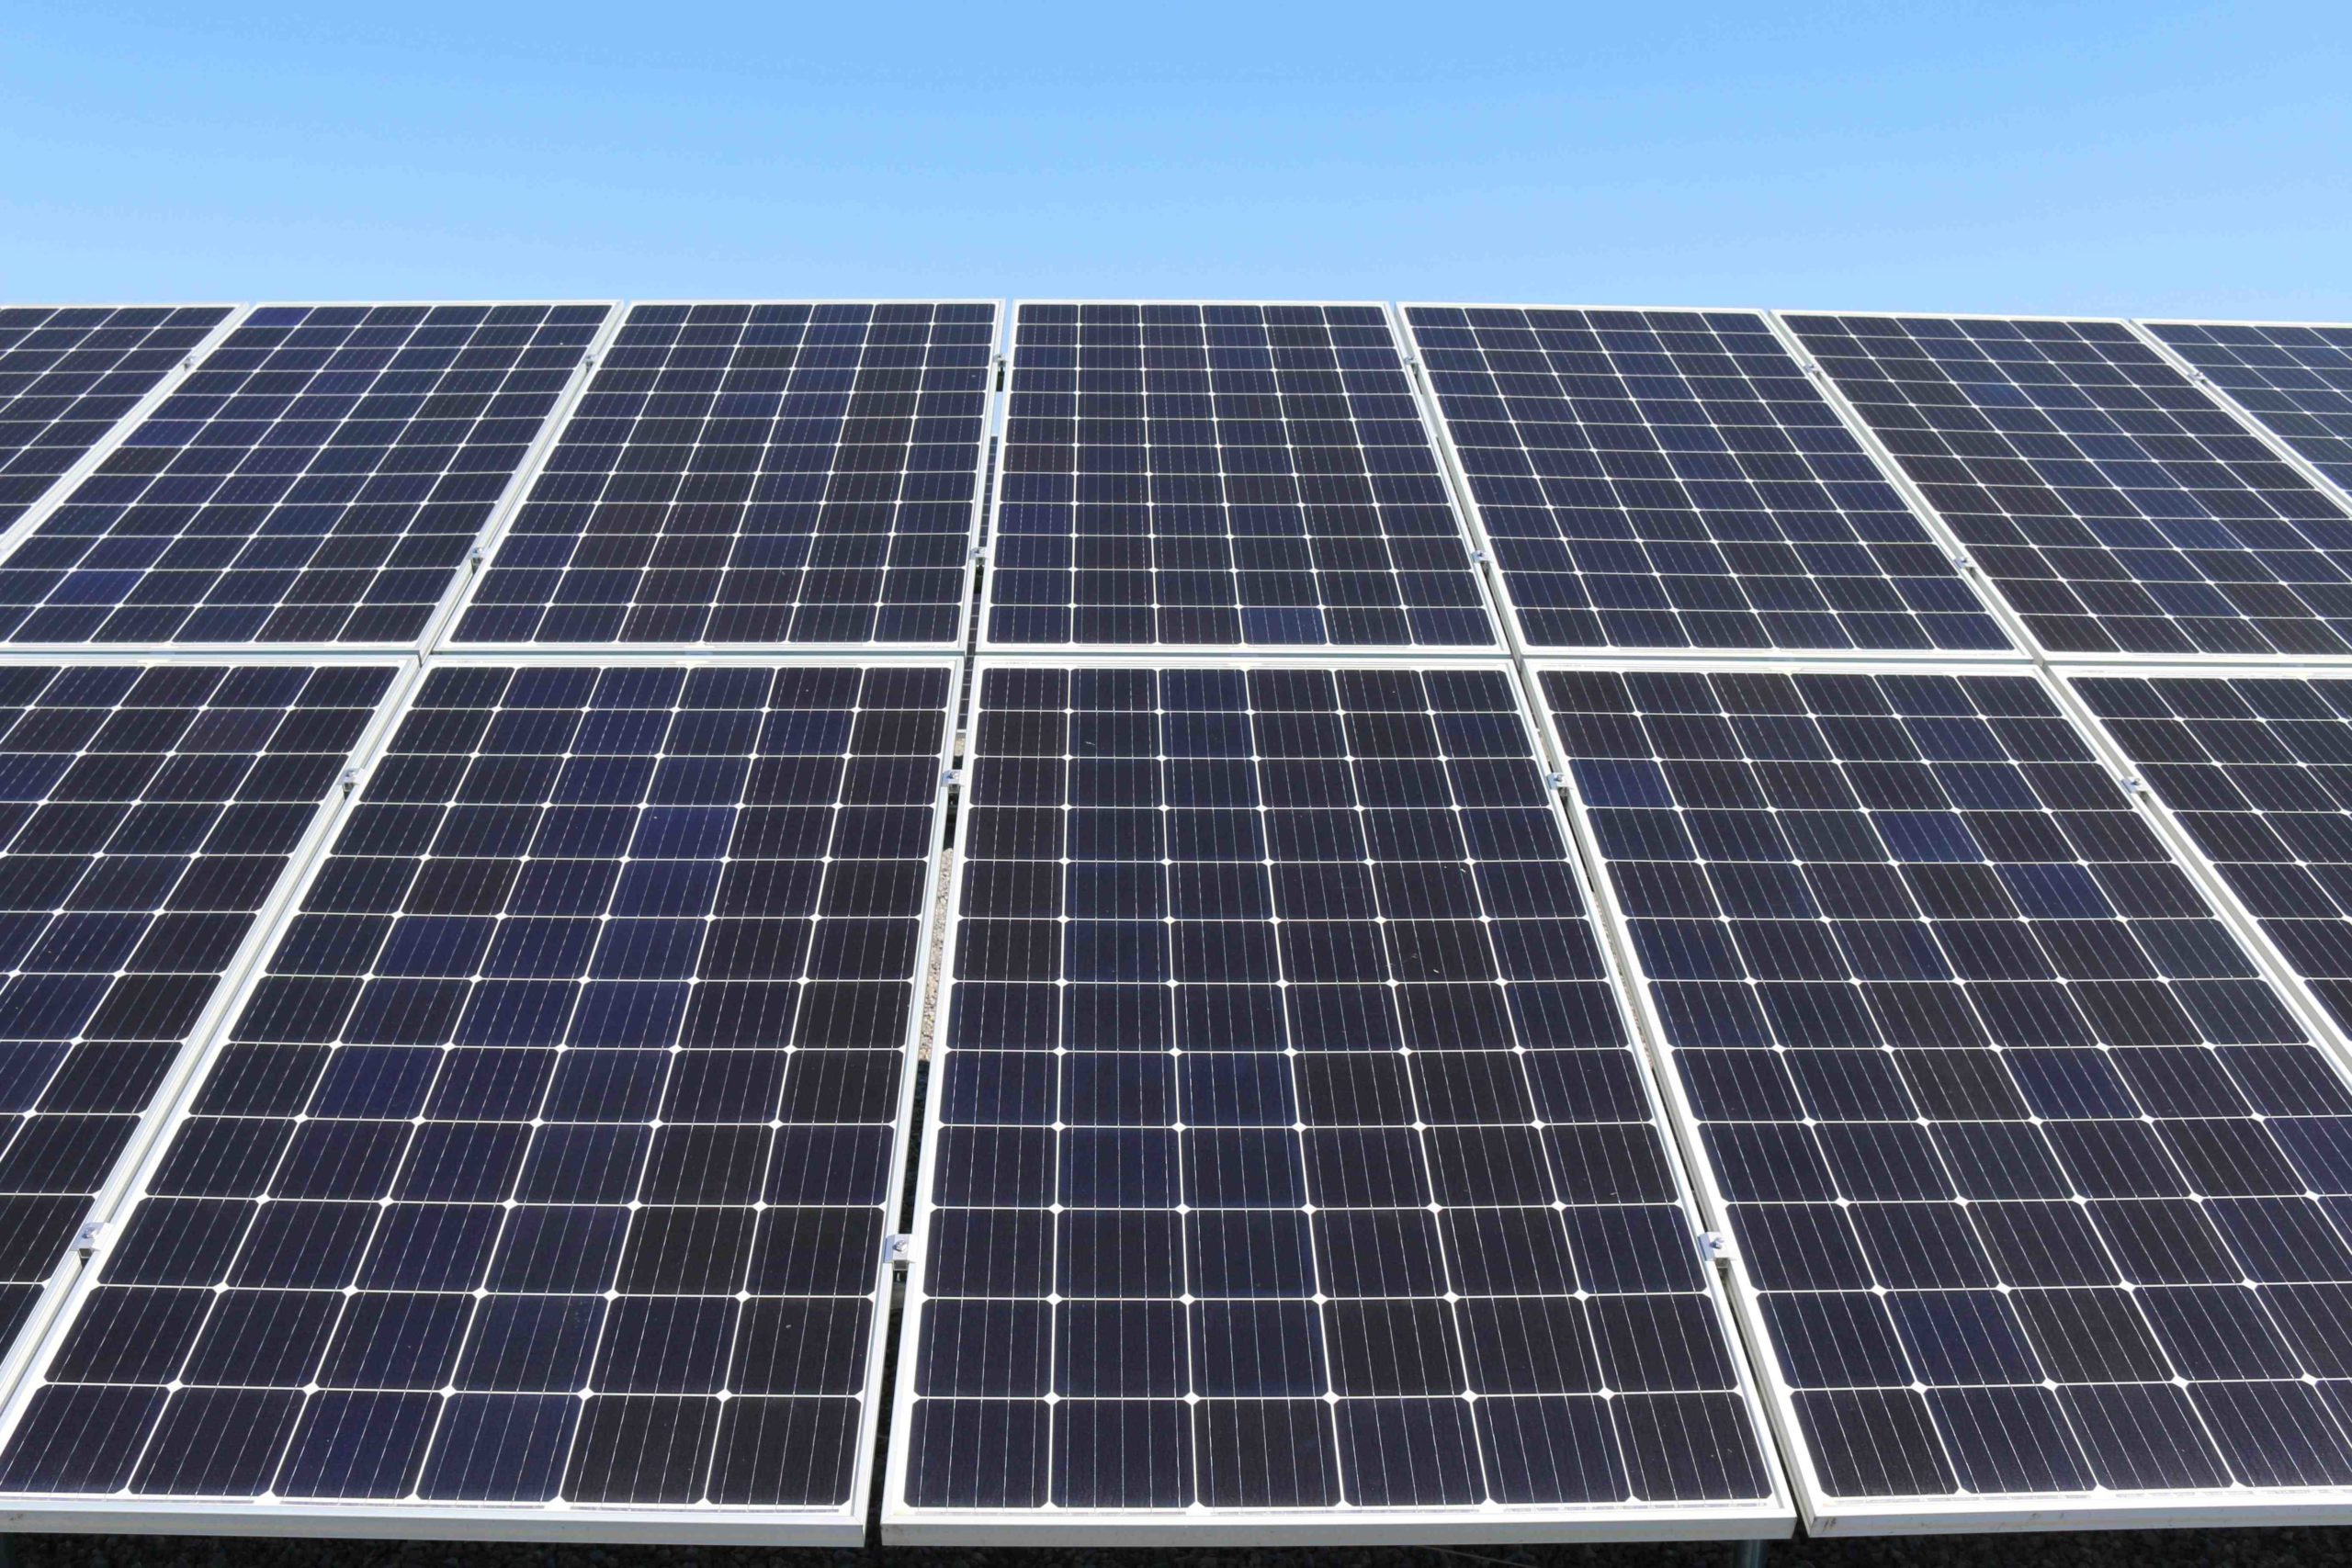 The energy company is looking to revolutionize solar panel technology